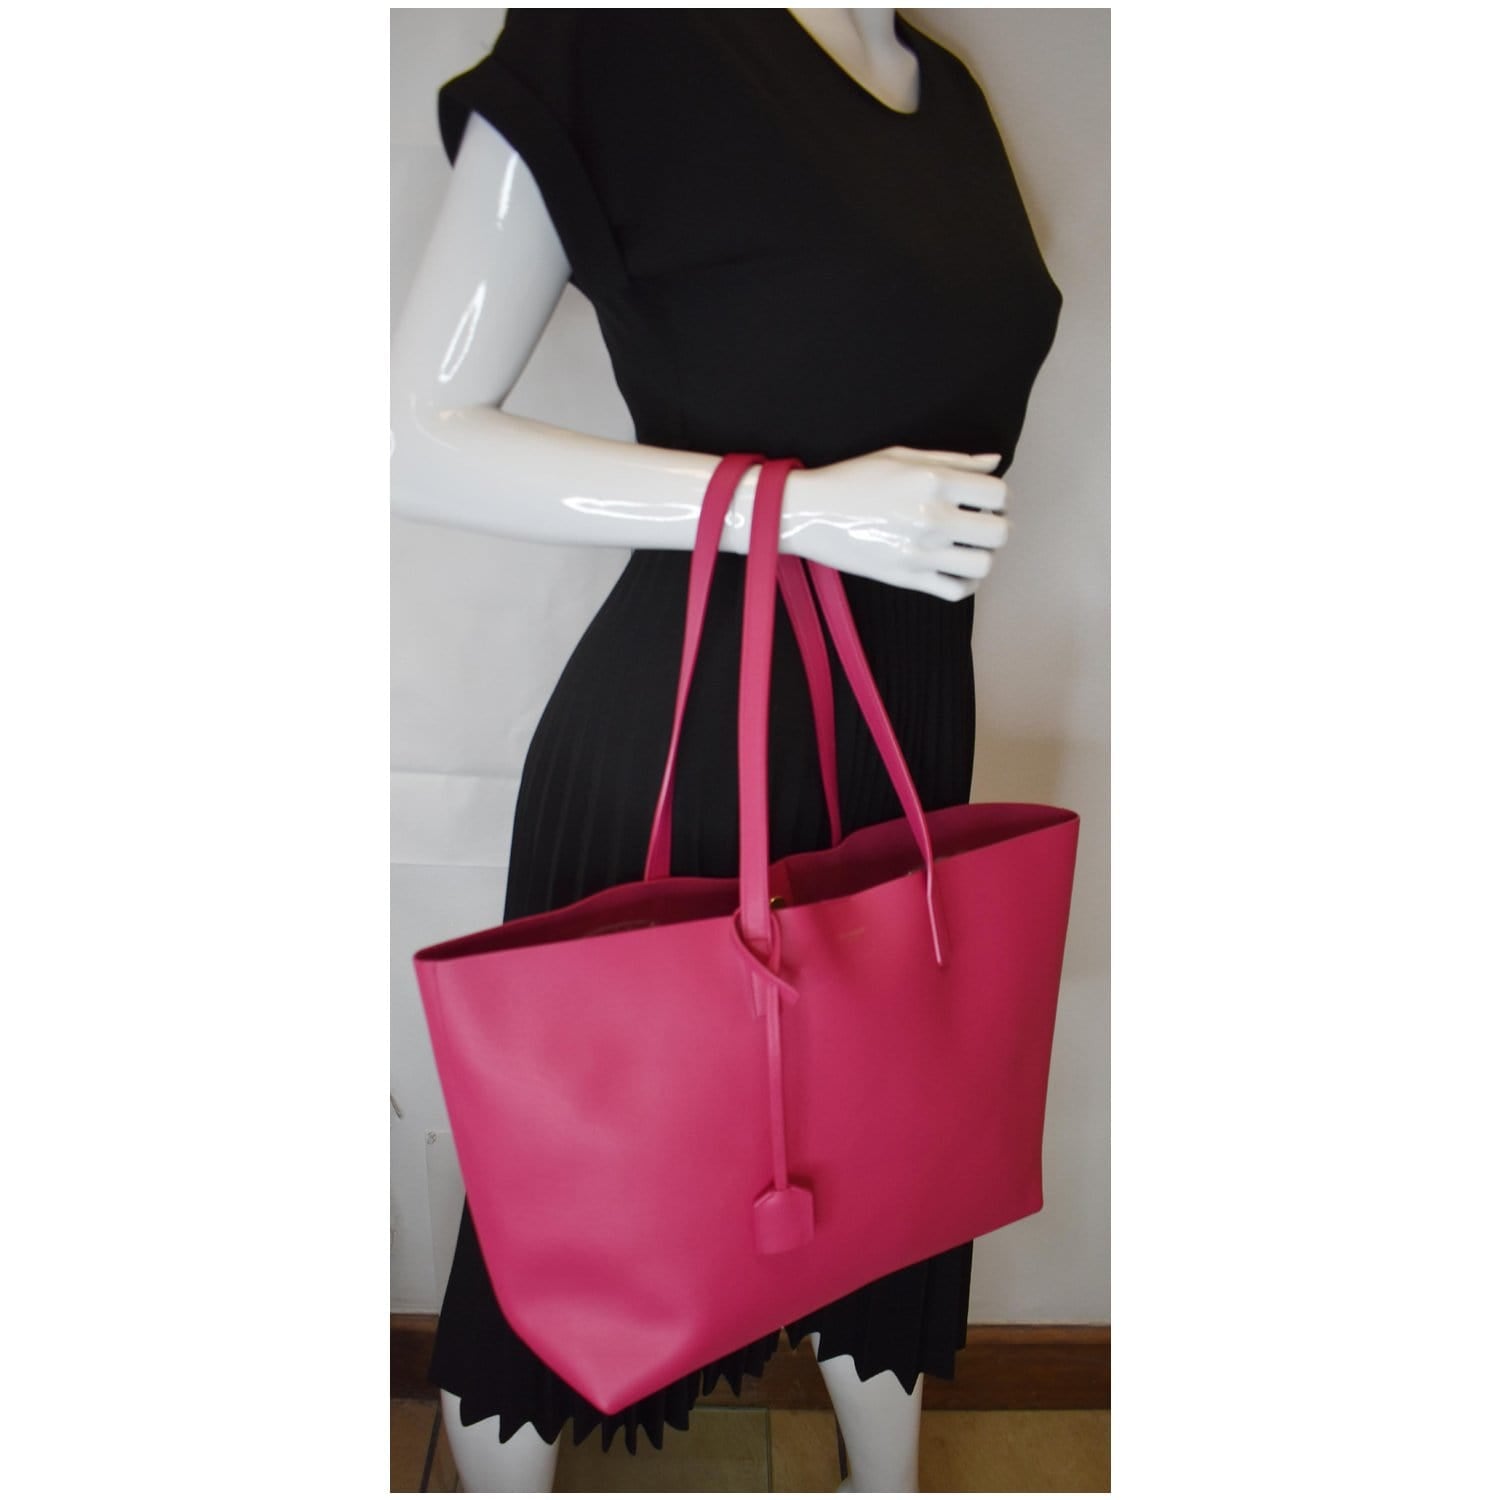 YVES SAINT LAURENT Large Leather Shopping Tote Bag Pink - 20% OFF